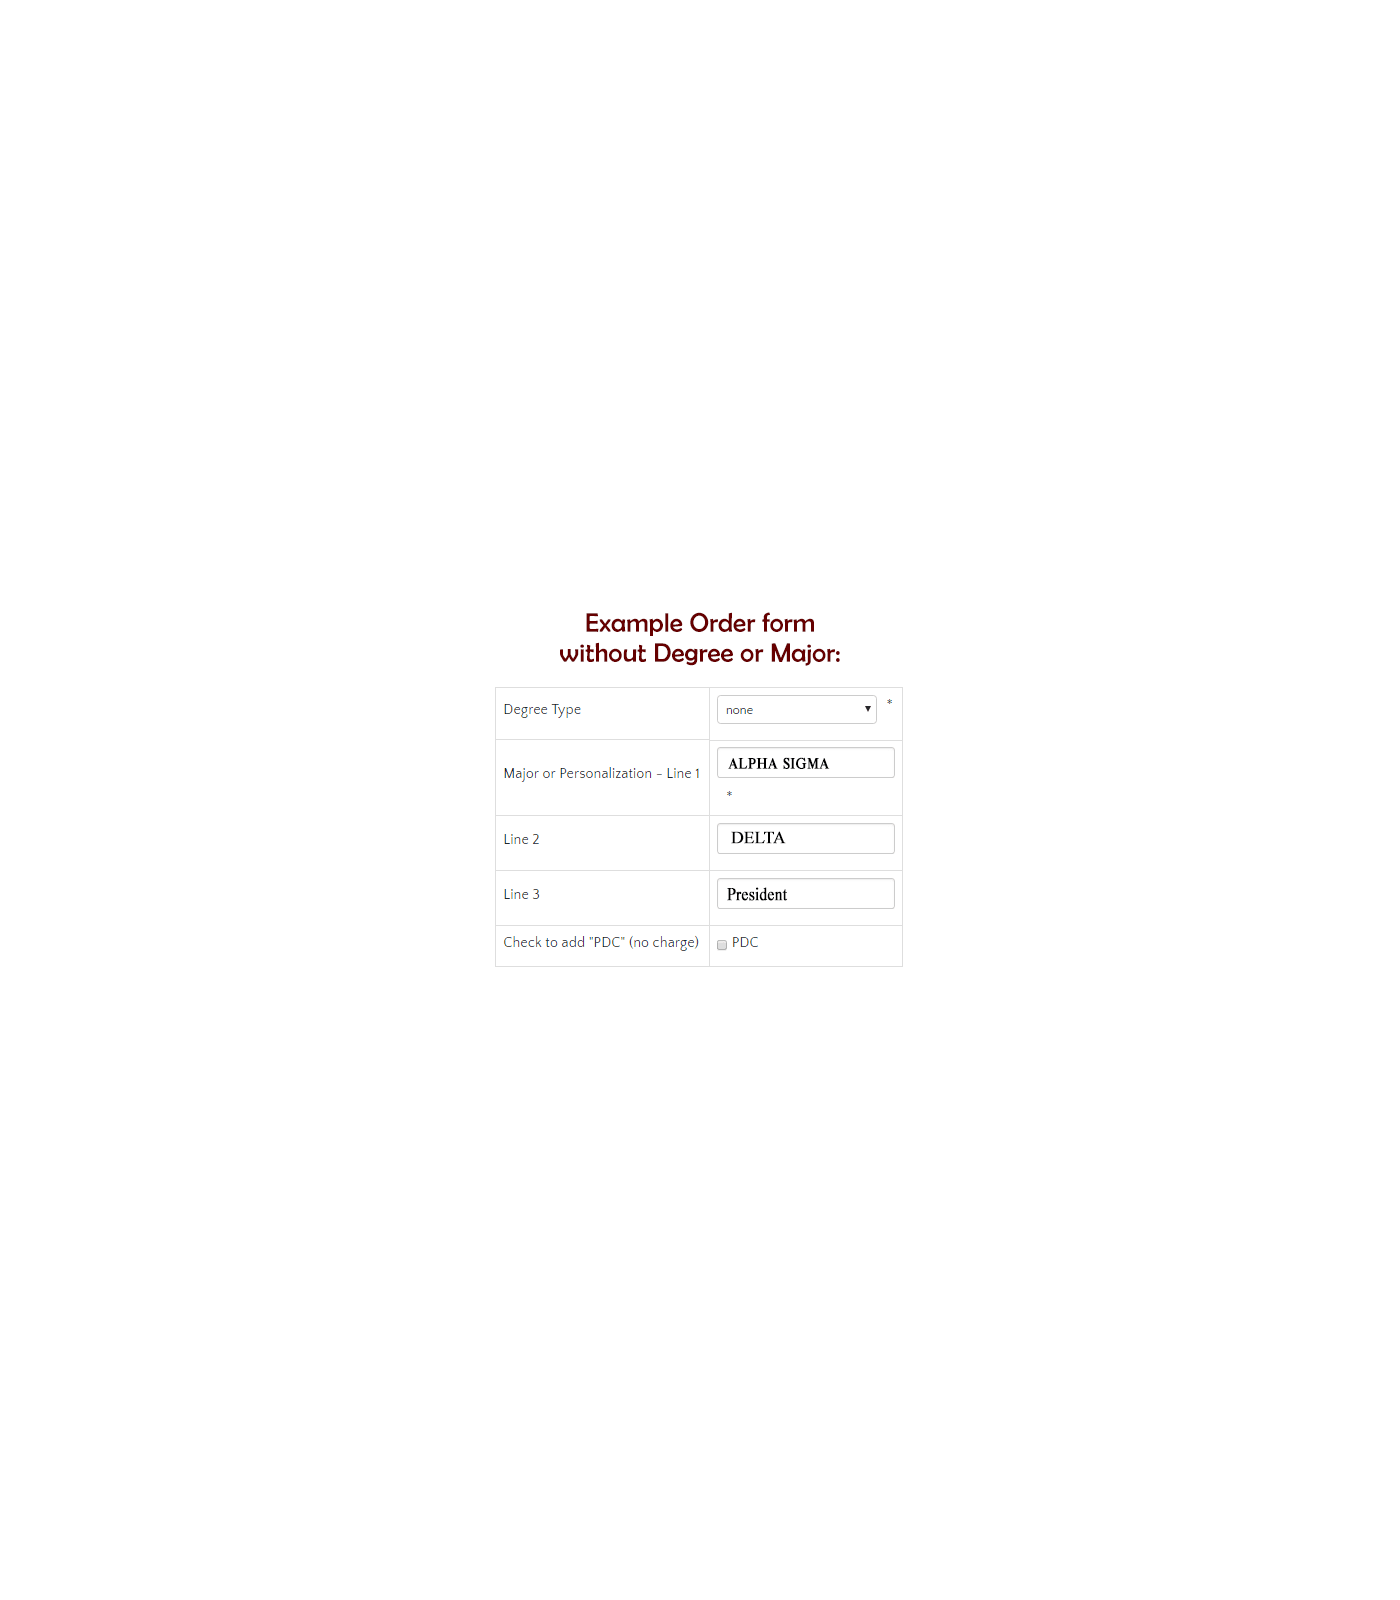 example_order_form_without_degree_or_major_1126631380